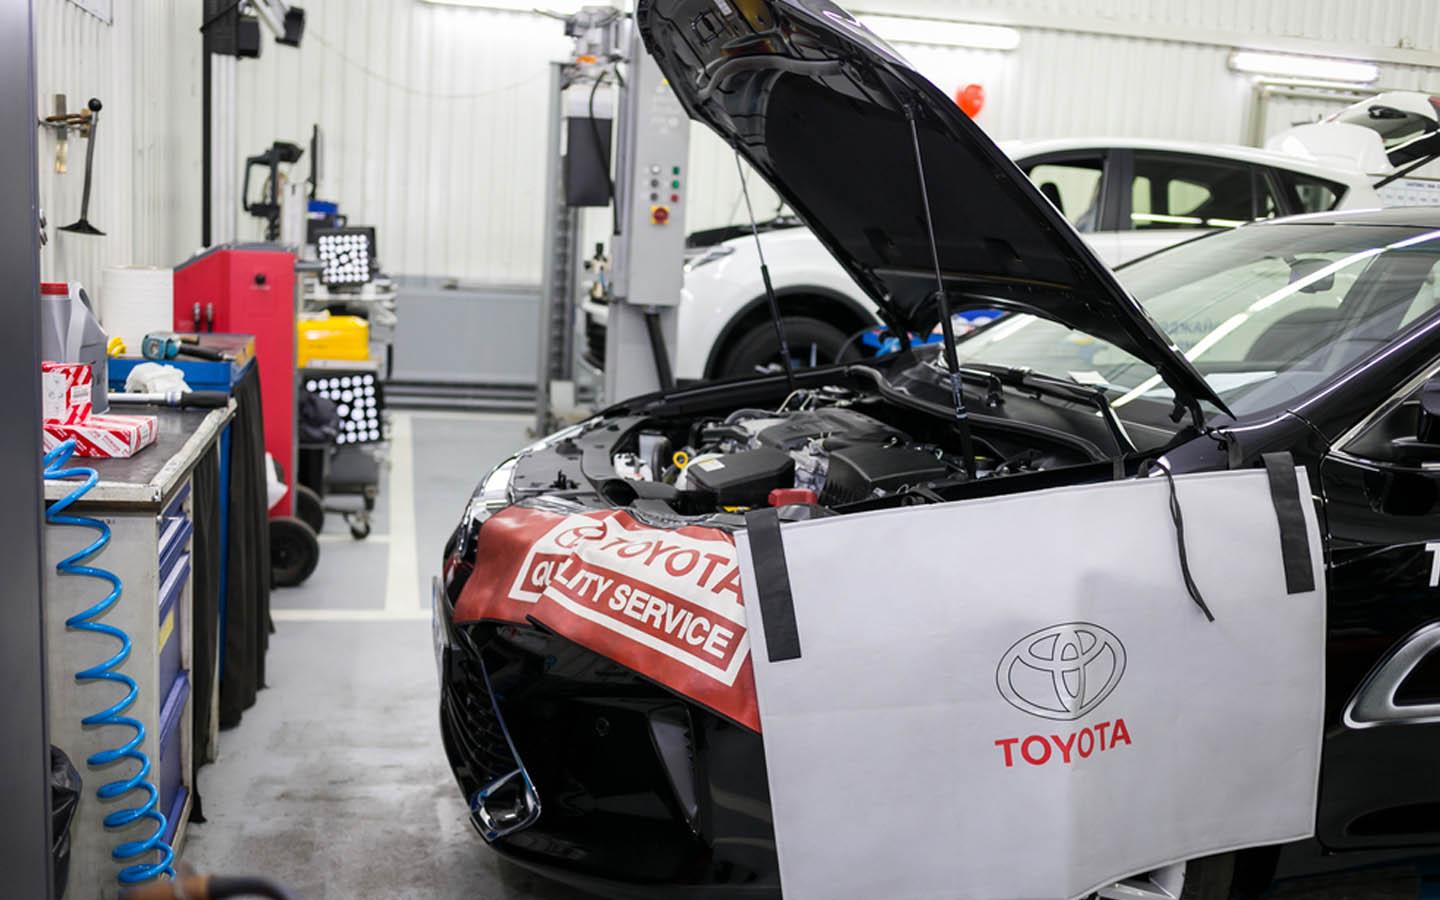 A car maintenance happening at an official Toyota service centre